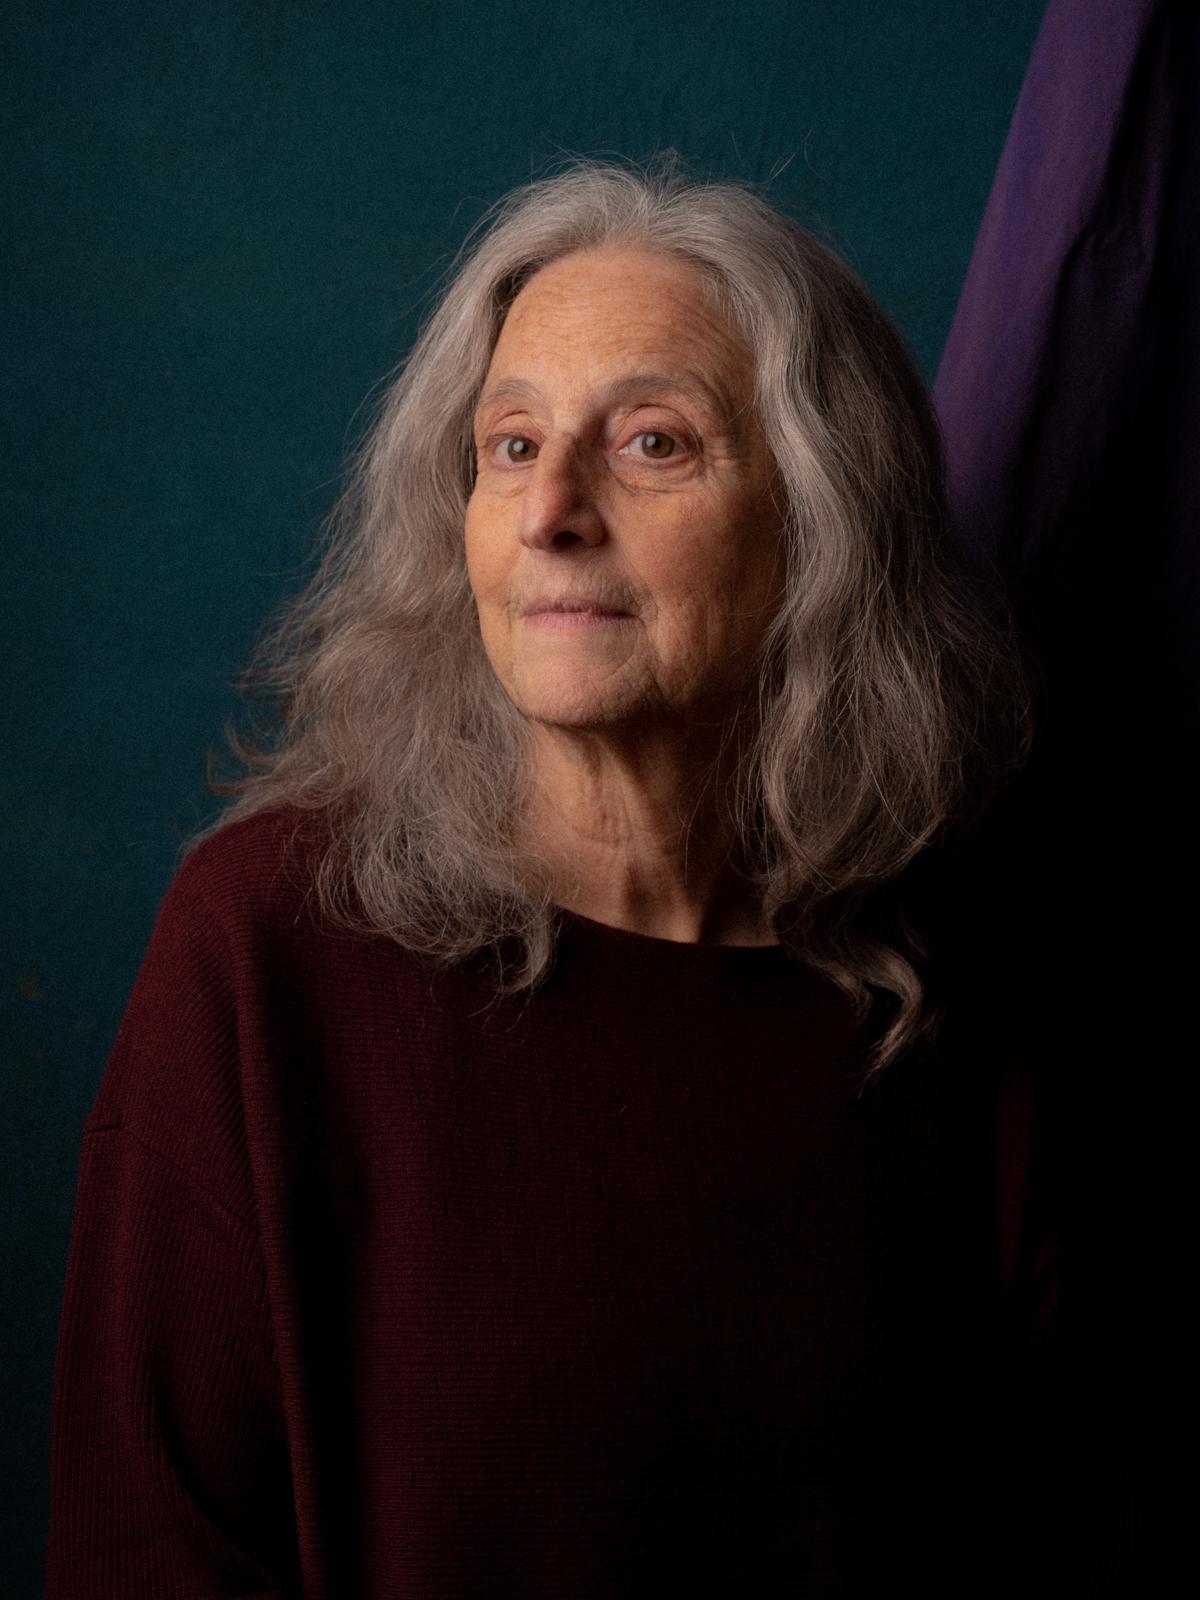 Photographic portrait of an older lady with beautiful long grey hair, looking smart, gaze slightly to the left, a slight smile